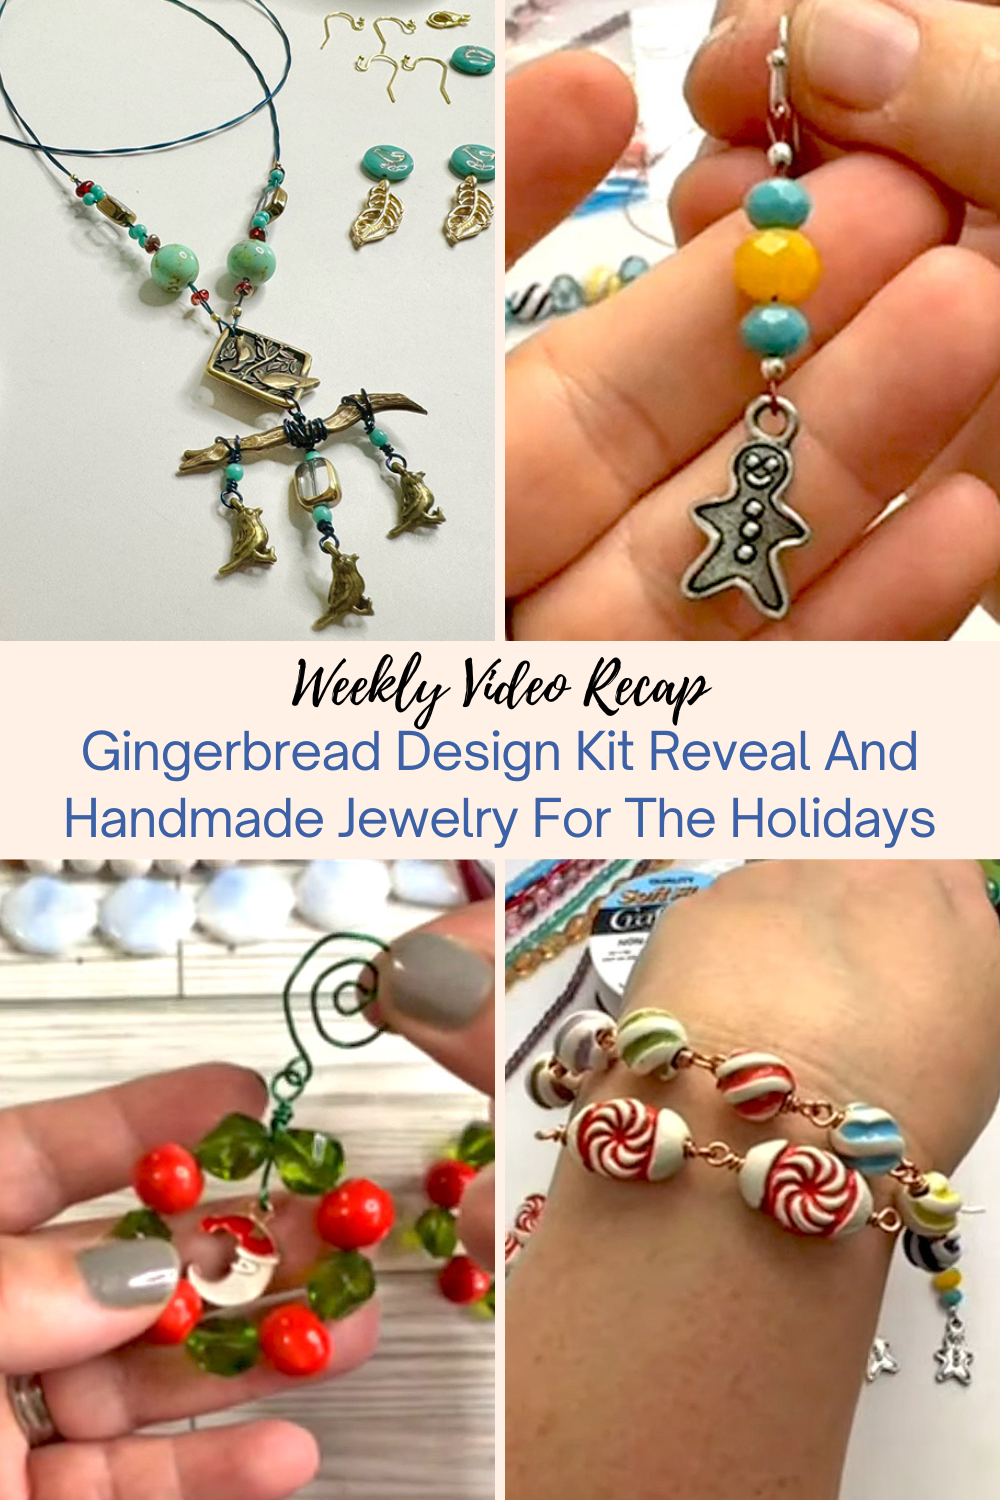 Gingerbread Design Kit Reveal And Handmade Jewelry For The Holidays Collage